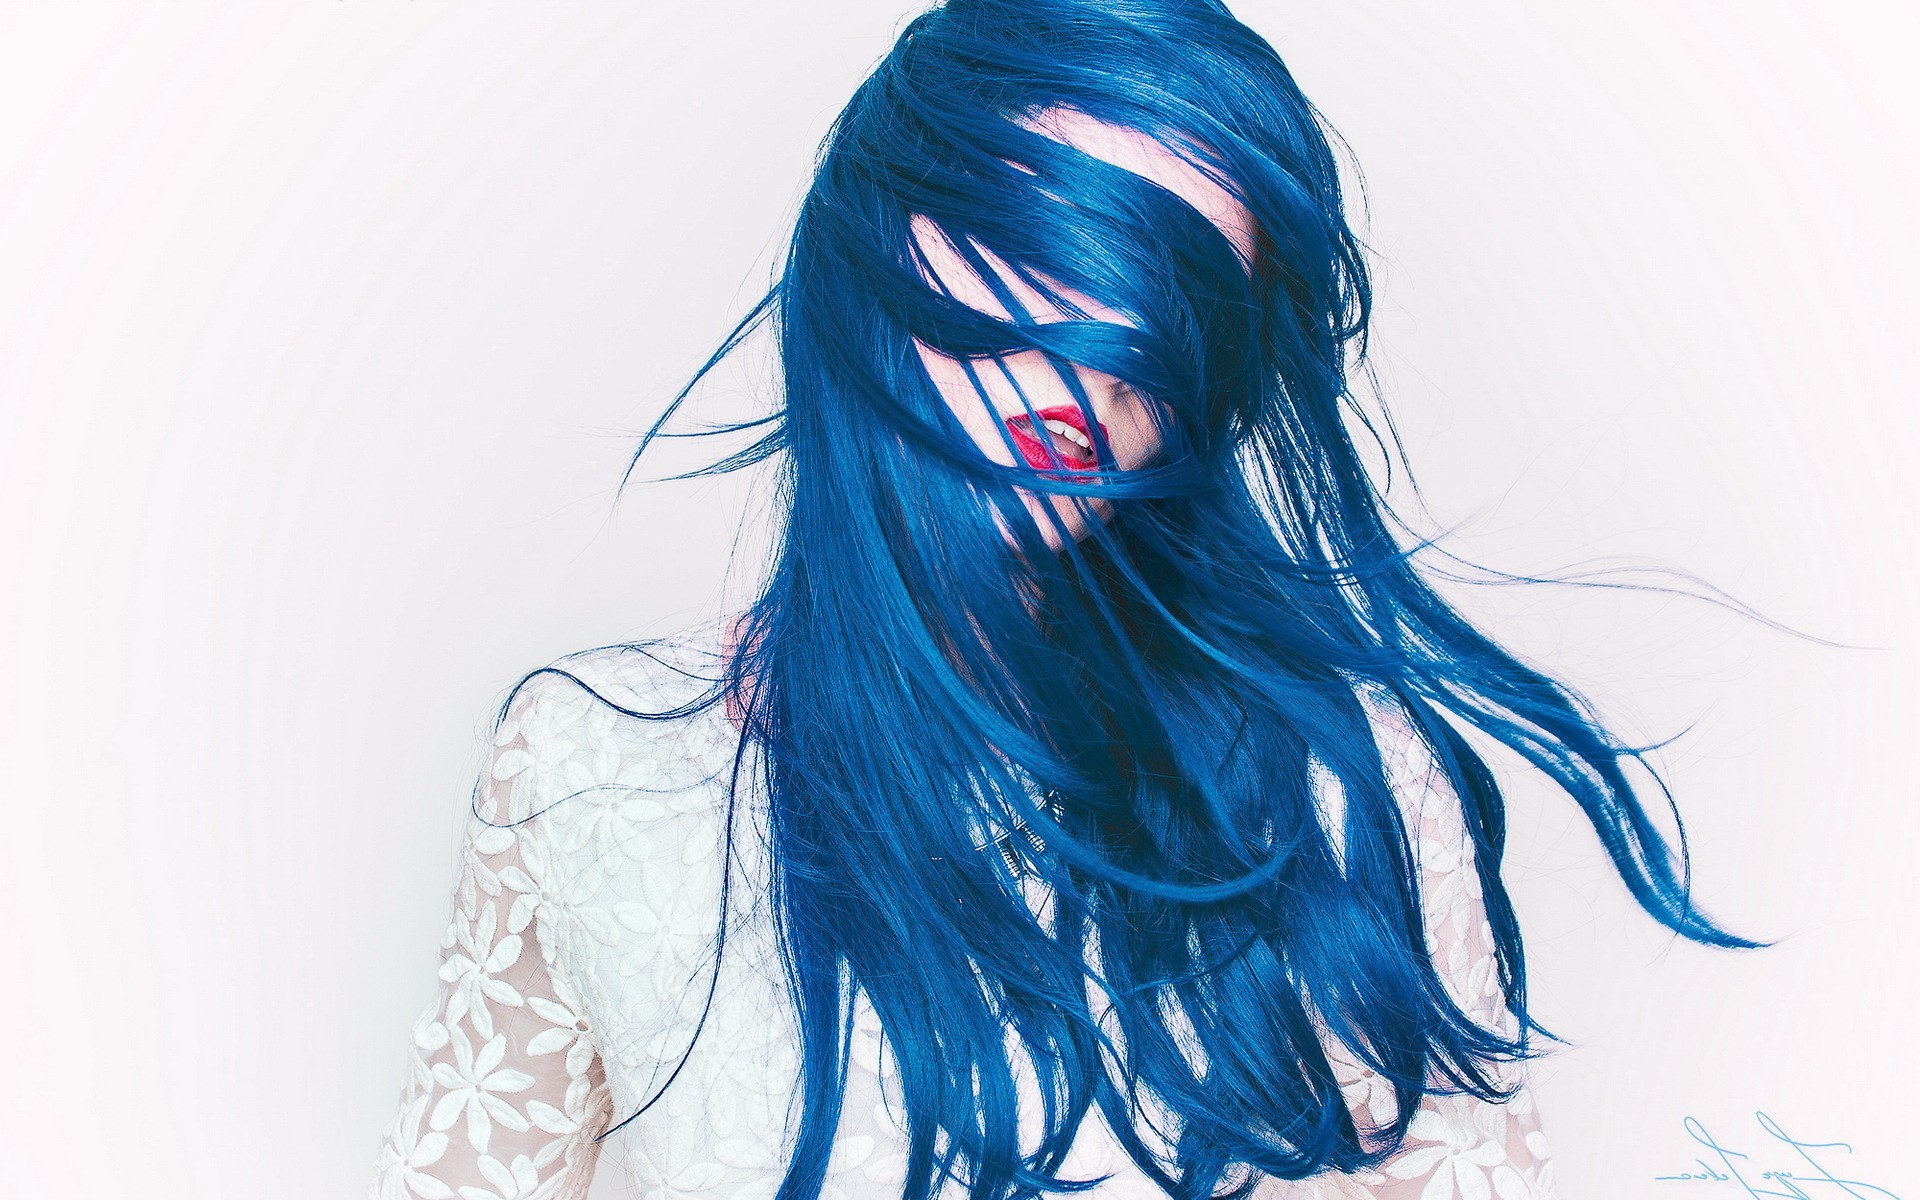 4. "The Best Shades of Blue Hair for Women in Their 40s" - wide 6